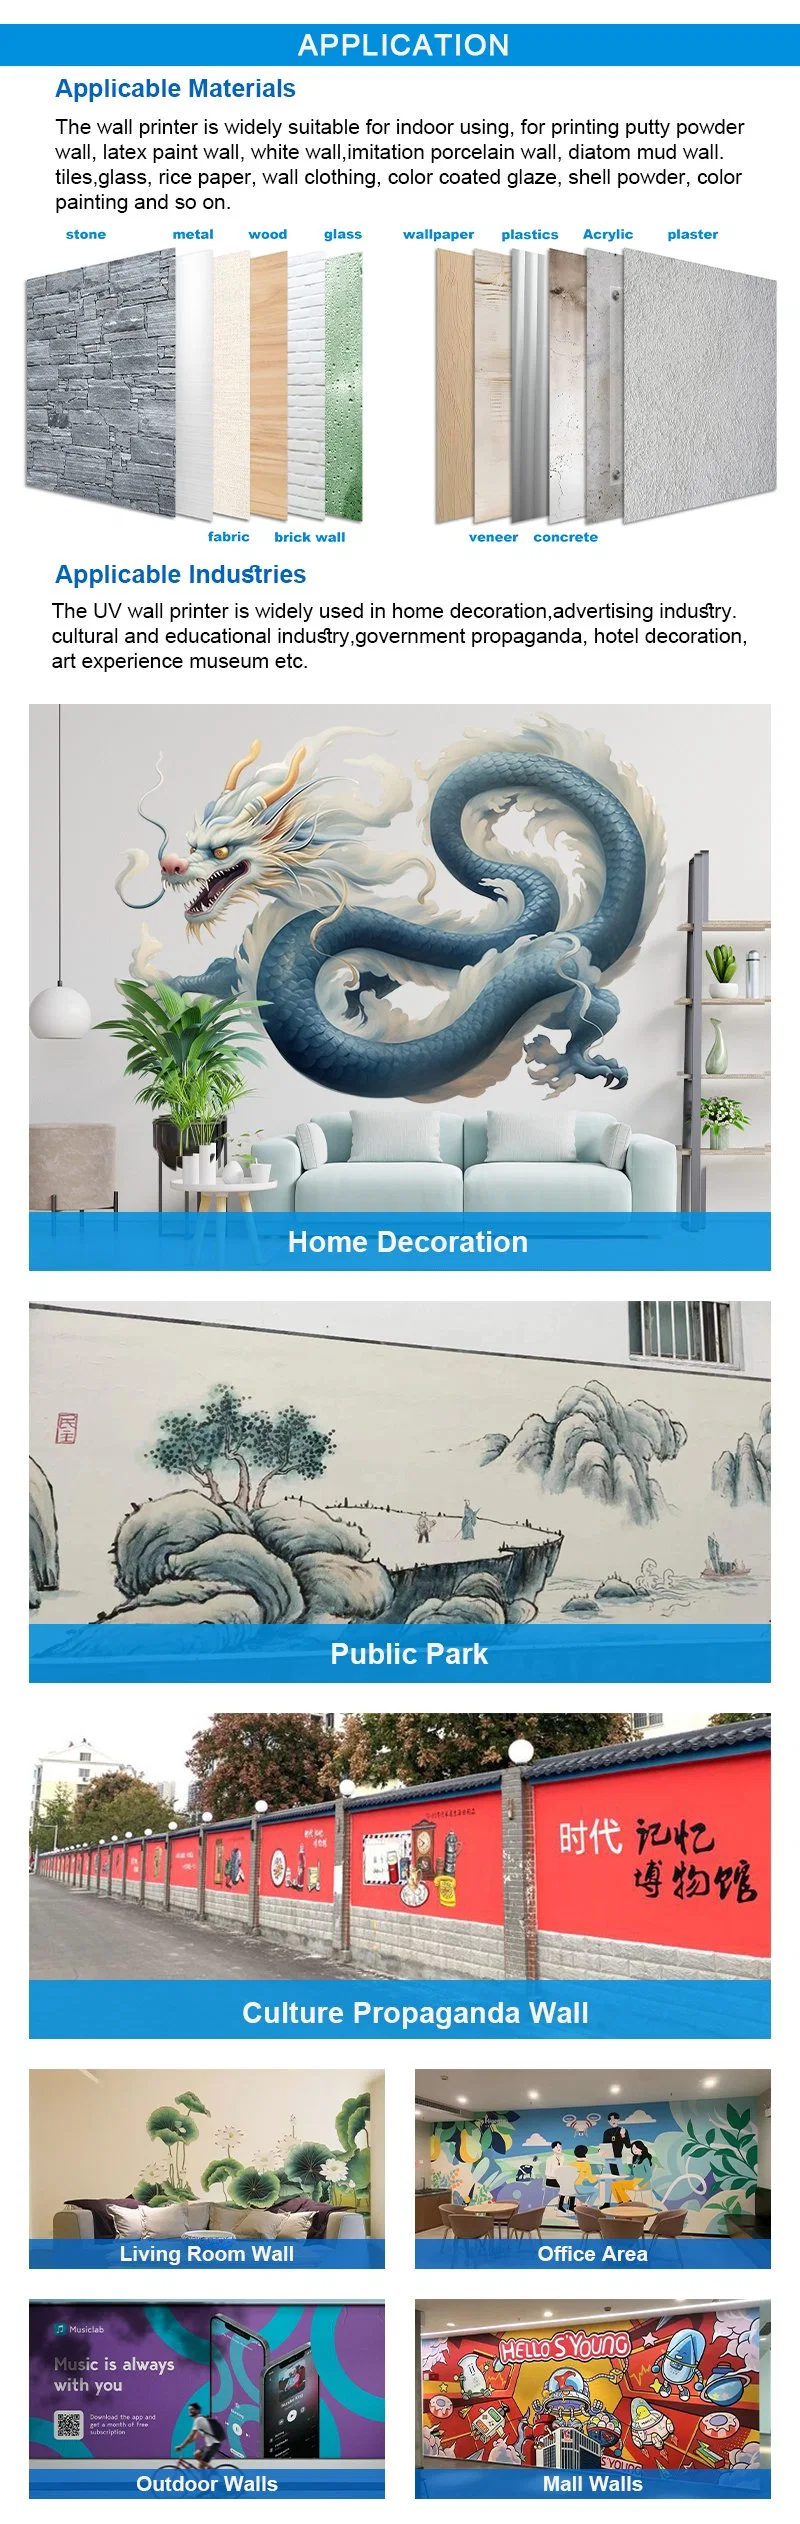 3D 5D 6D Effect Vertical Wall Art Inkjet Printer Price Direct to Wall Painting Printing Machine Portable Automatic Move by Wheel